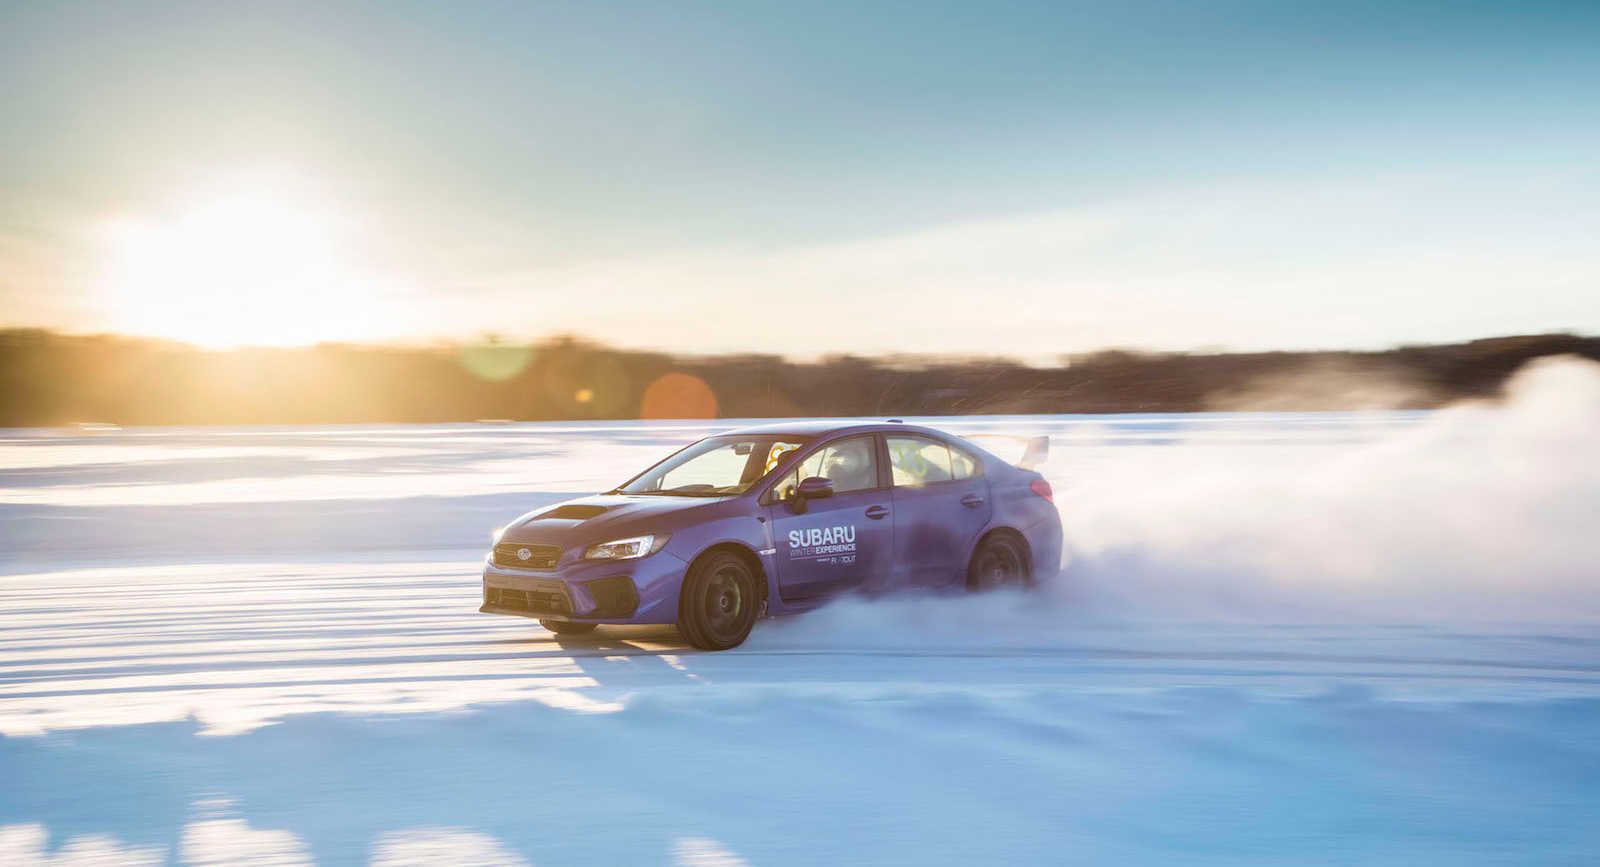 How To Channel Your Inner Rally Driver At Subaru’s Winter